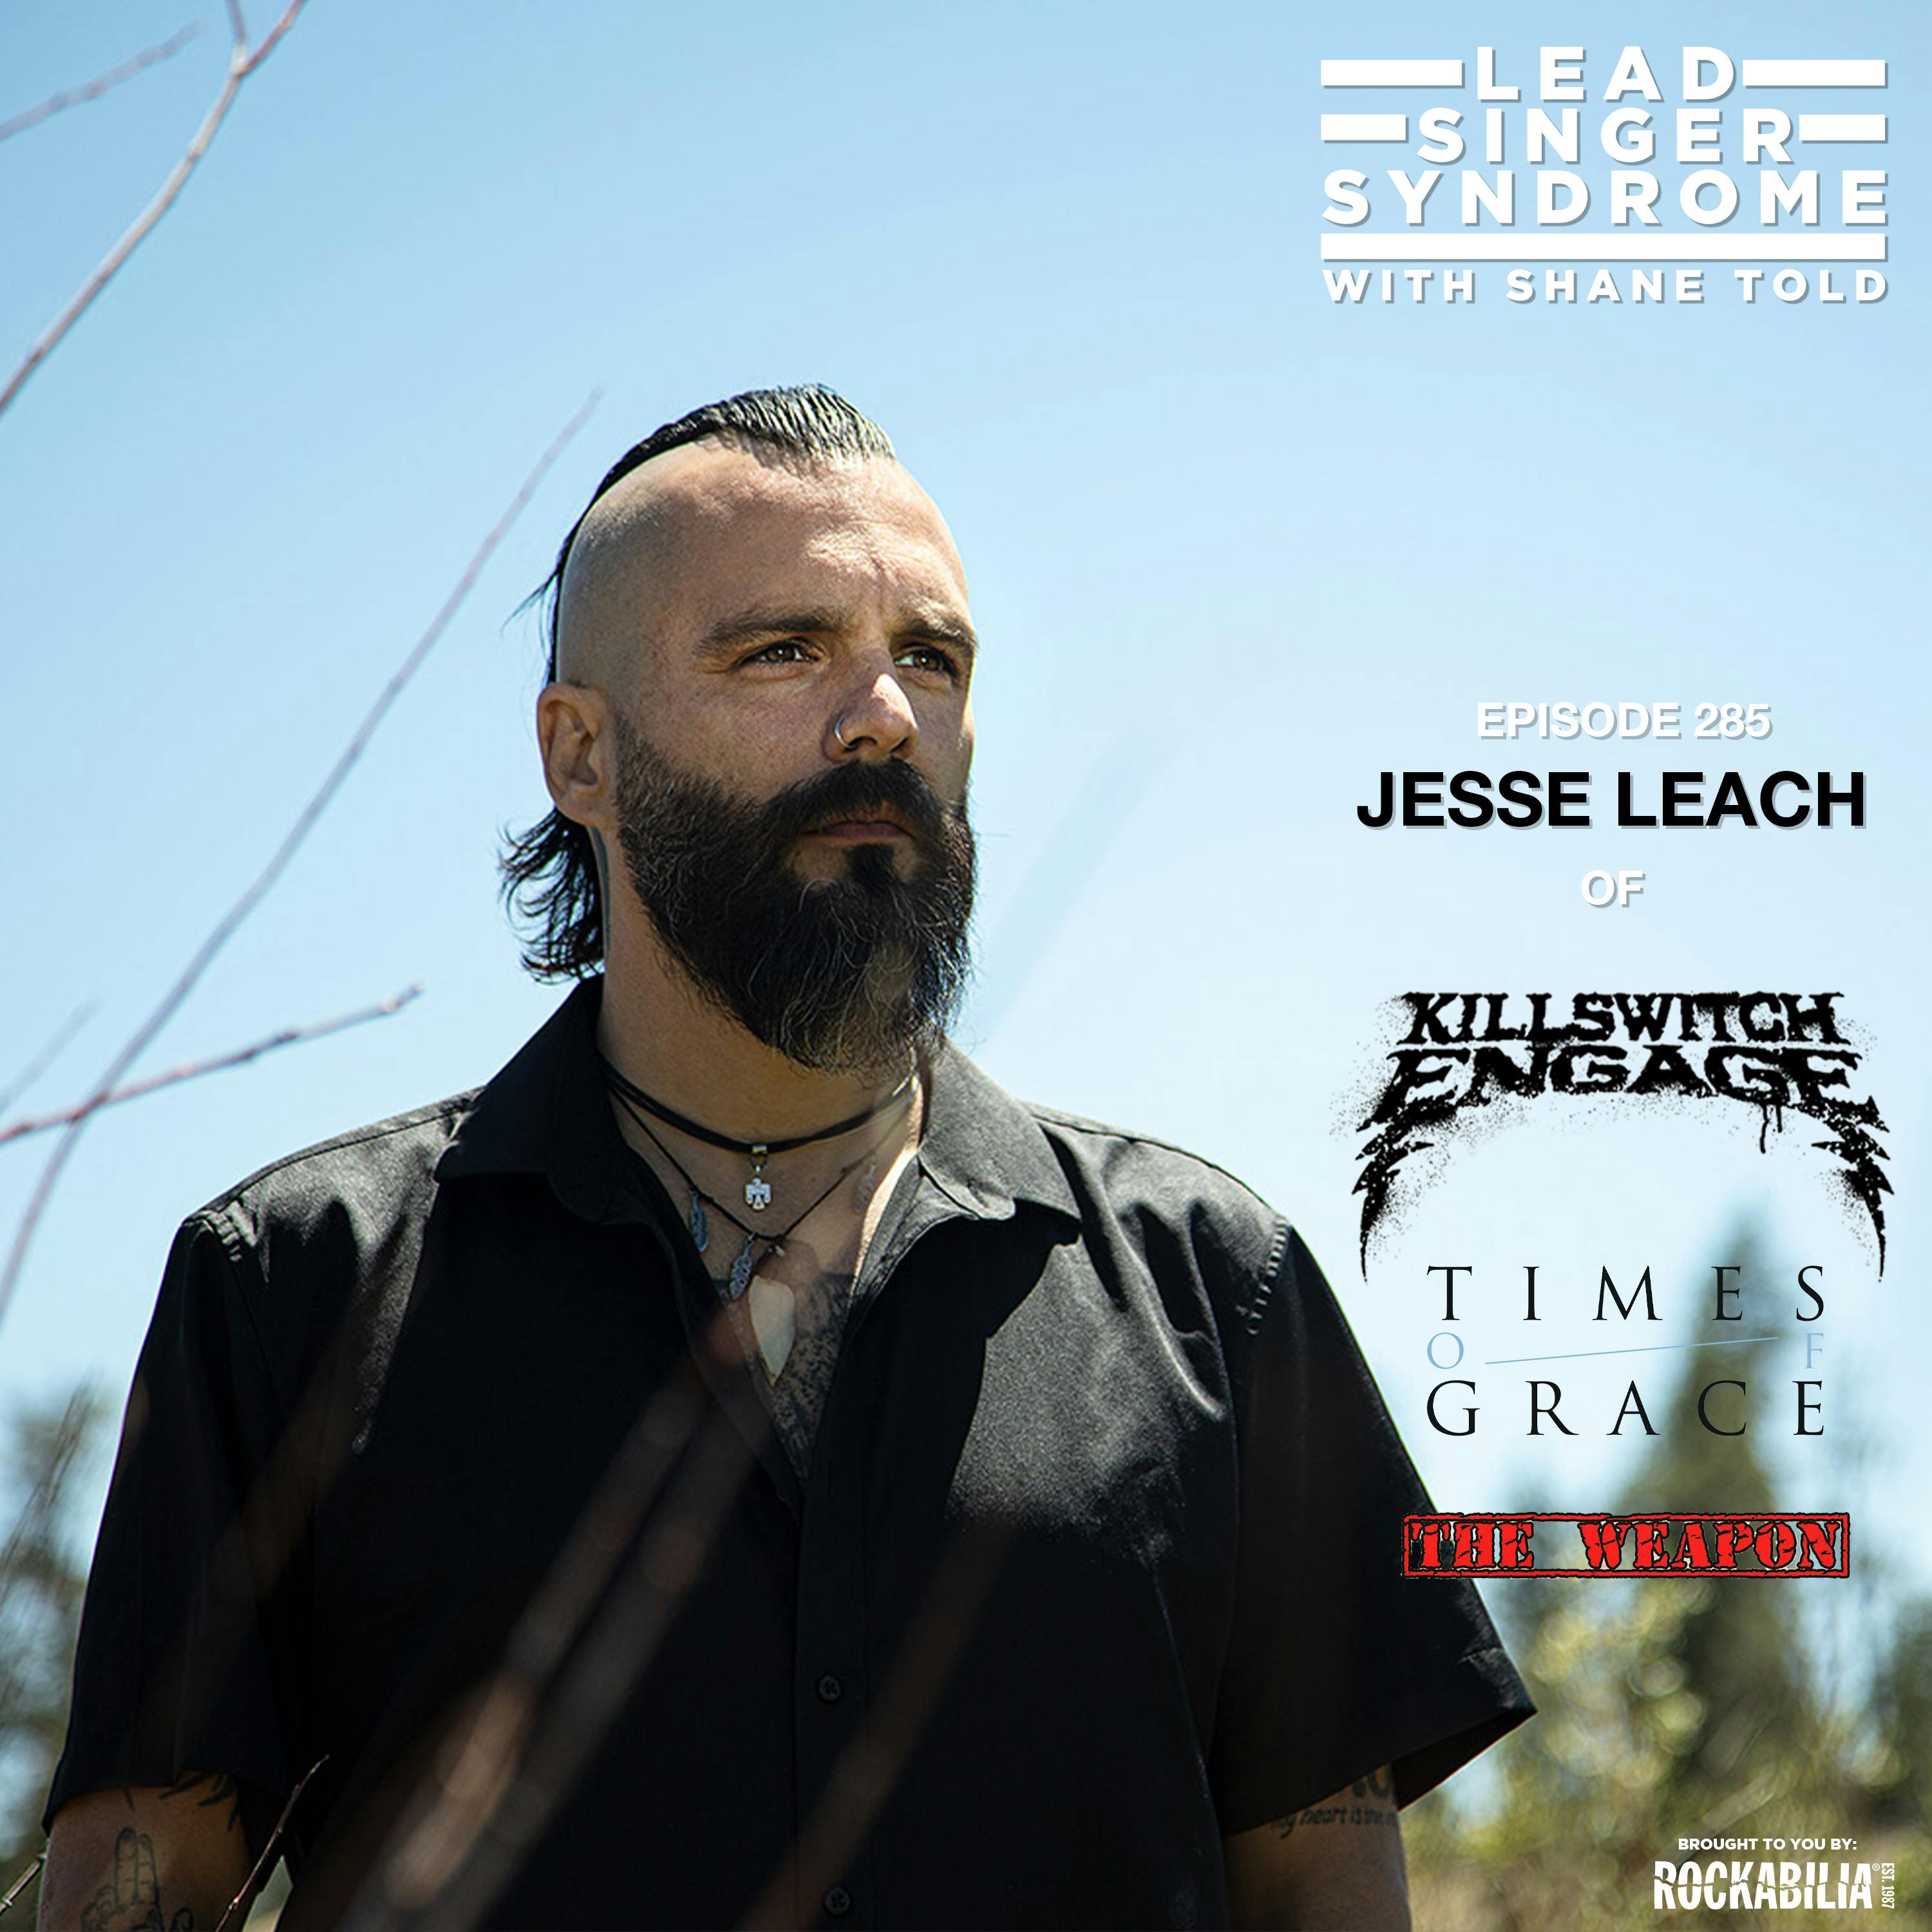 Jesse Leach (Killswitch Engage, Times of Grace, The Weapon)